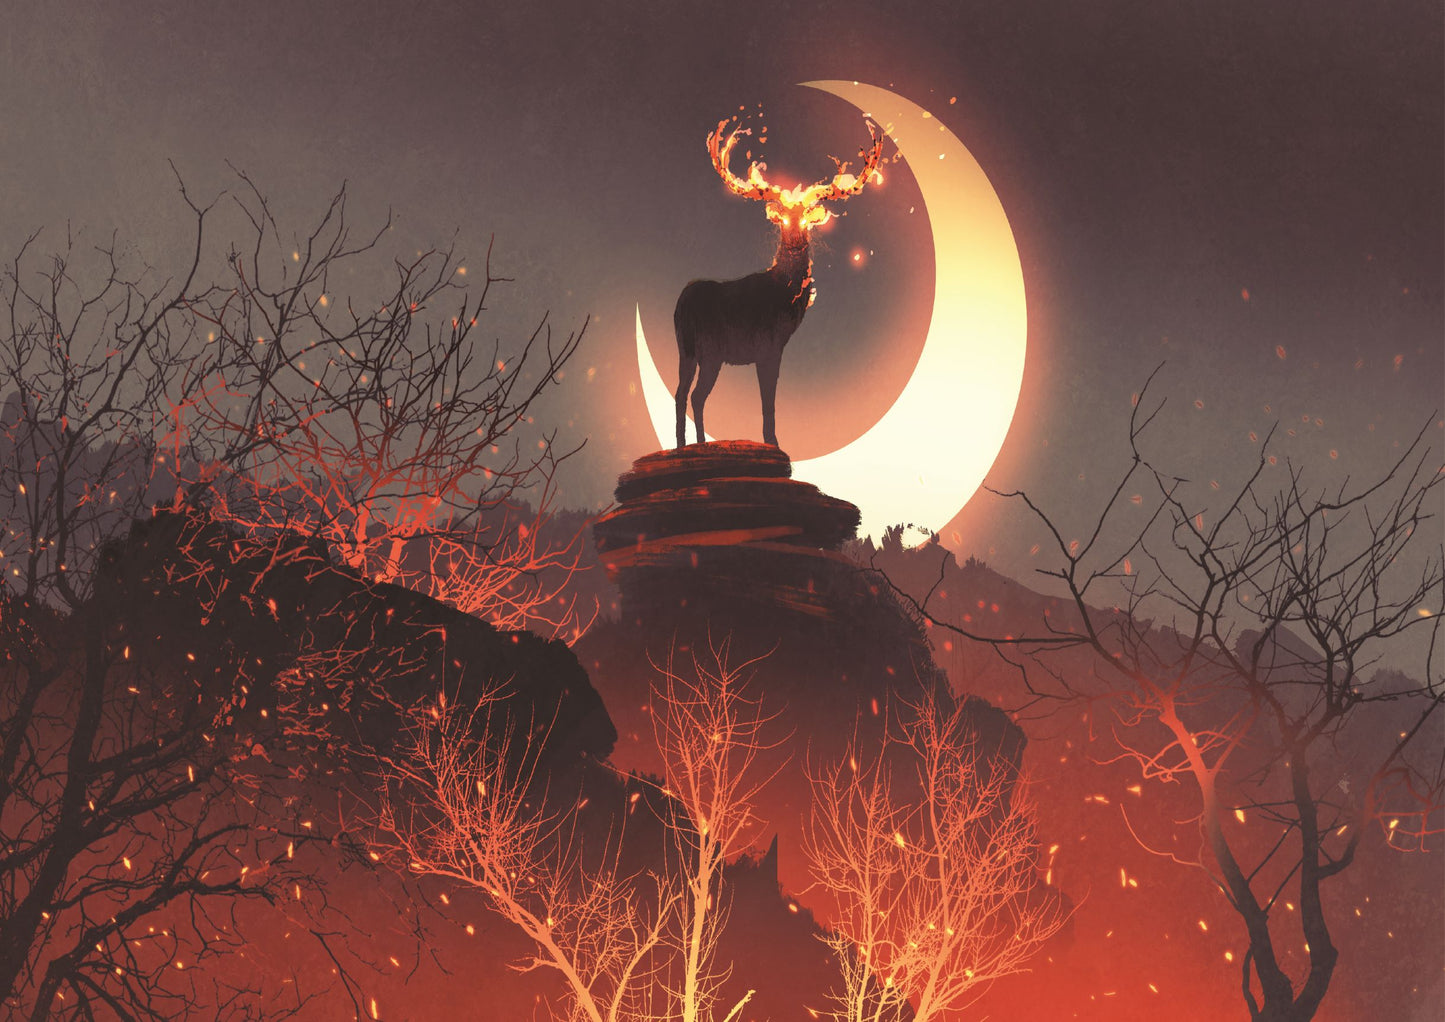 The deer with its fire horns standing on rocks in forest fire